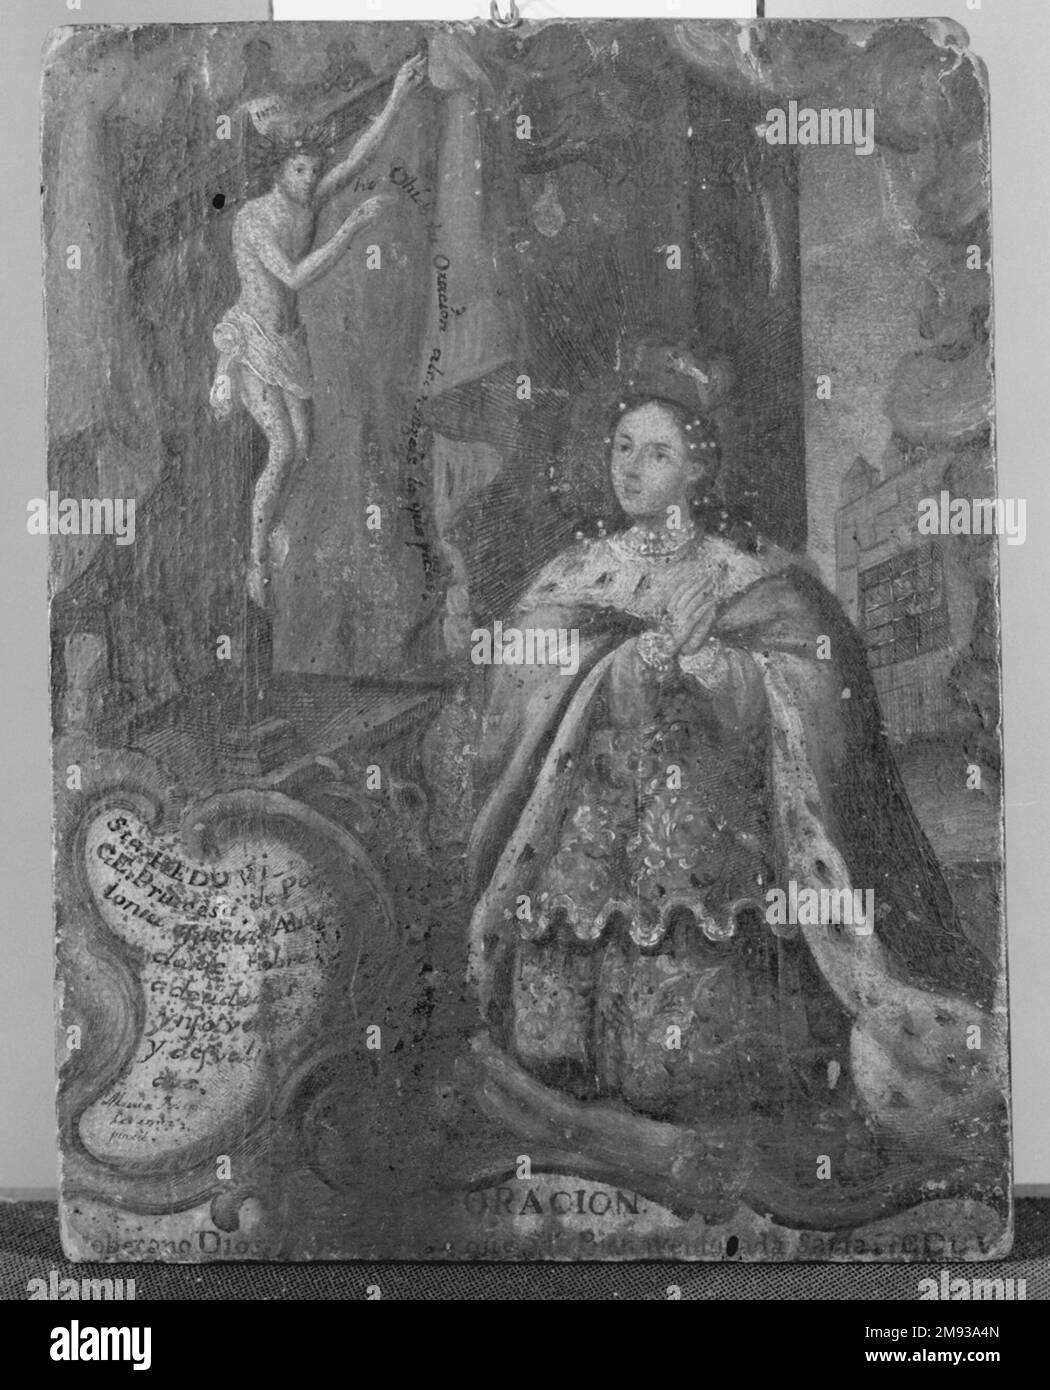 Queen Kneeling Before Cross Unknown. Queen Kneeling Before Cross, late 18th-early 19th century. Painting on wood, 7 11/16 x 5 15/16 in. (19.5 x 15.1 cm).   European Art late 18th-early 19th century Stock Photo